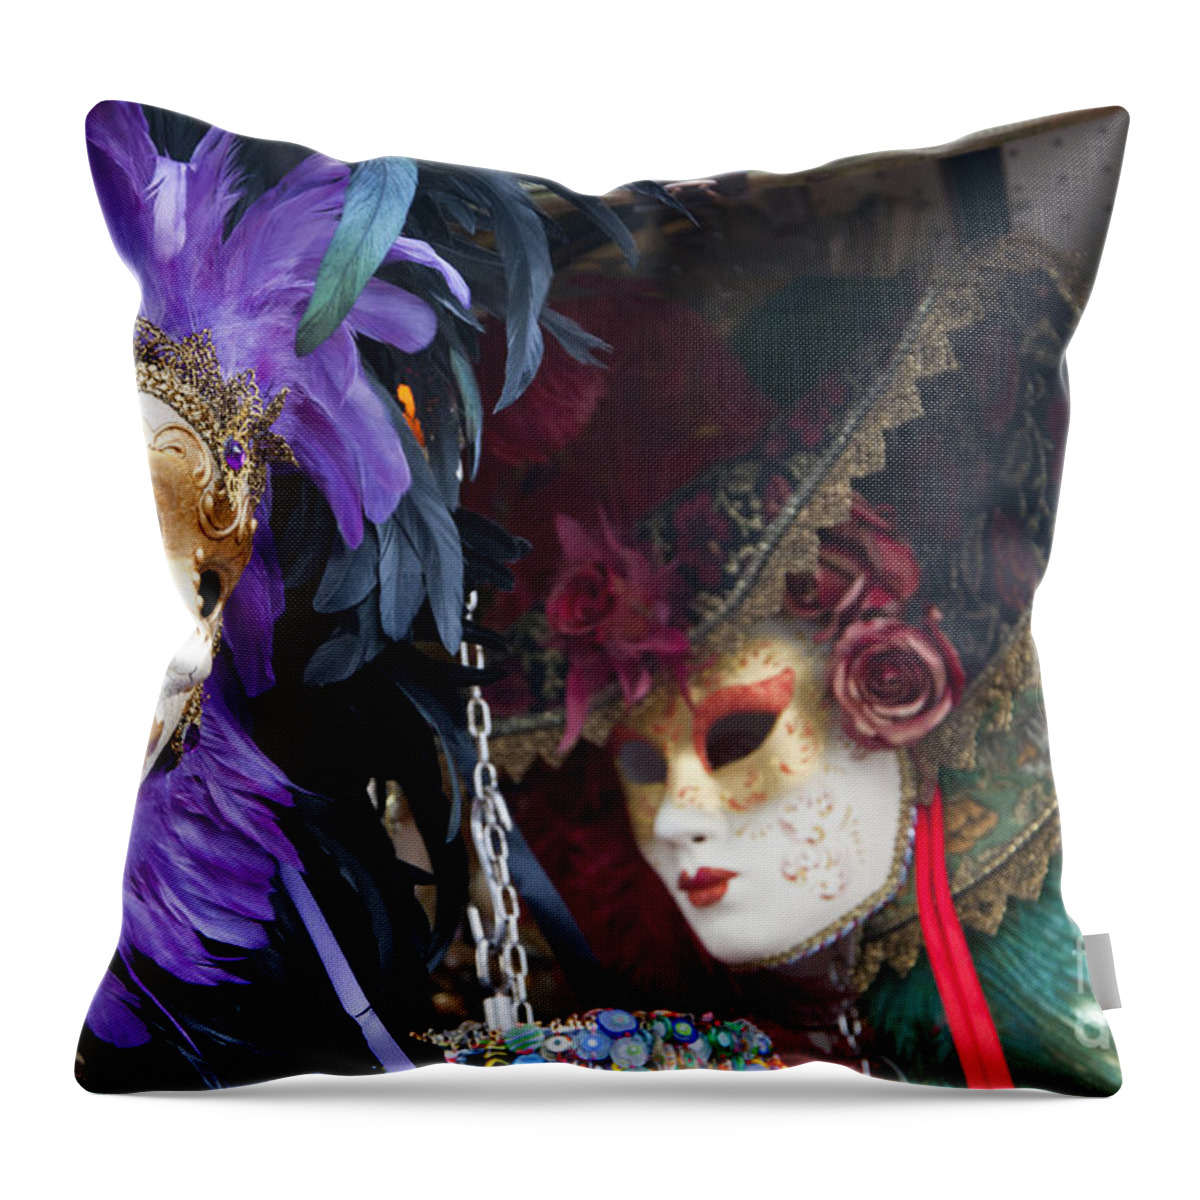 Masks Throw Pillow featuring the photograph Mysterious Masks by Brenda Kean